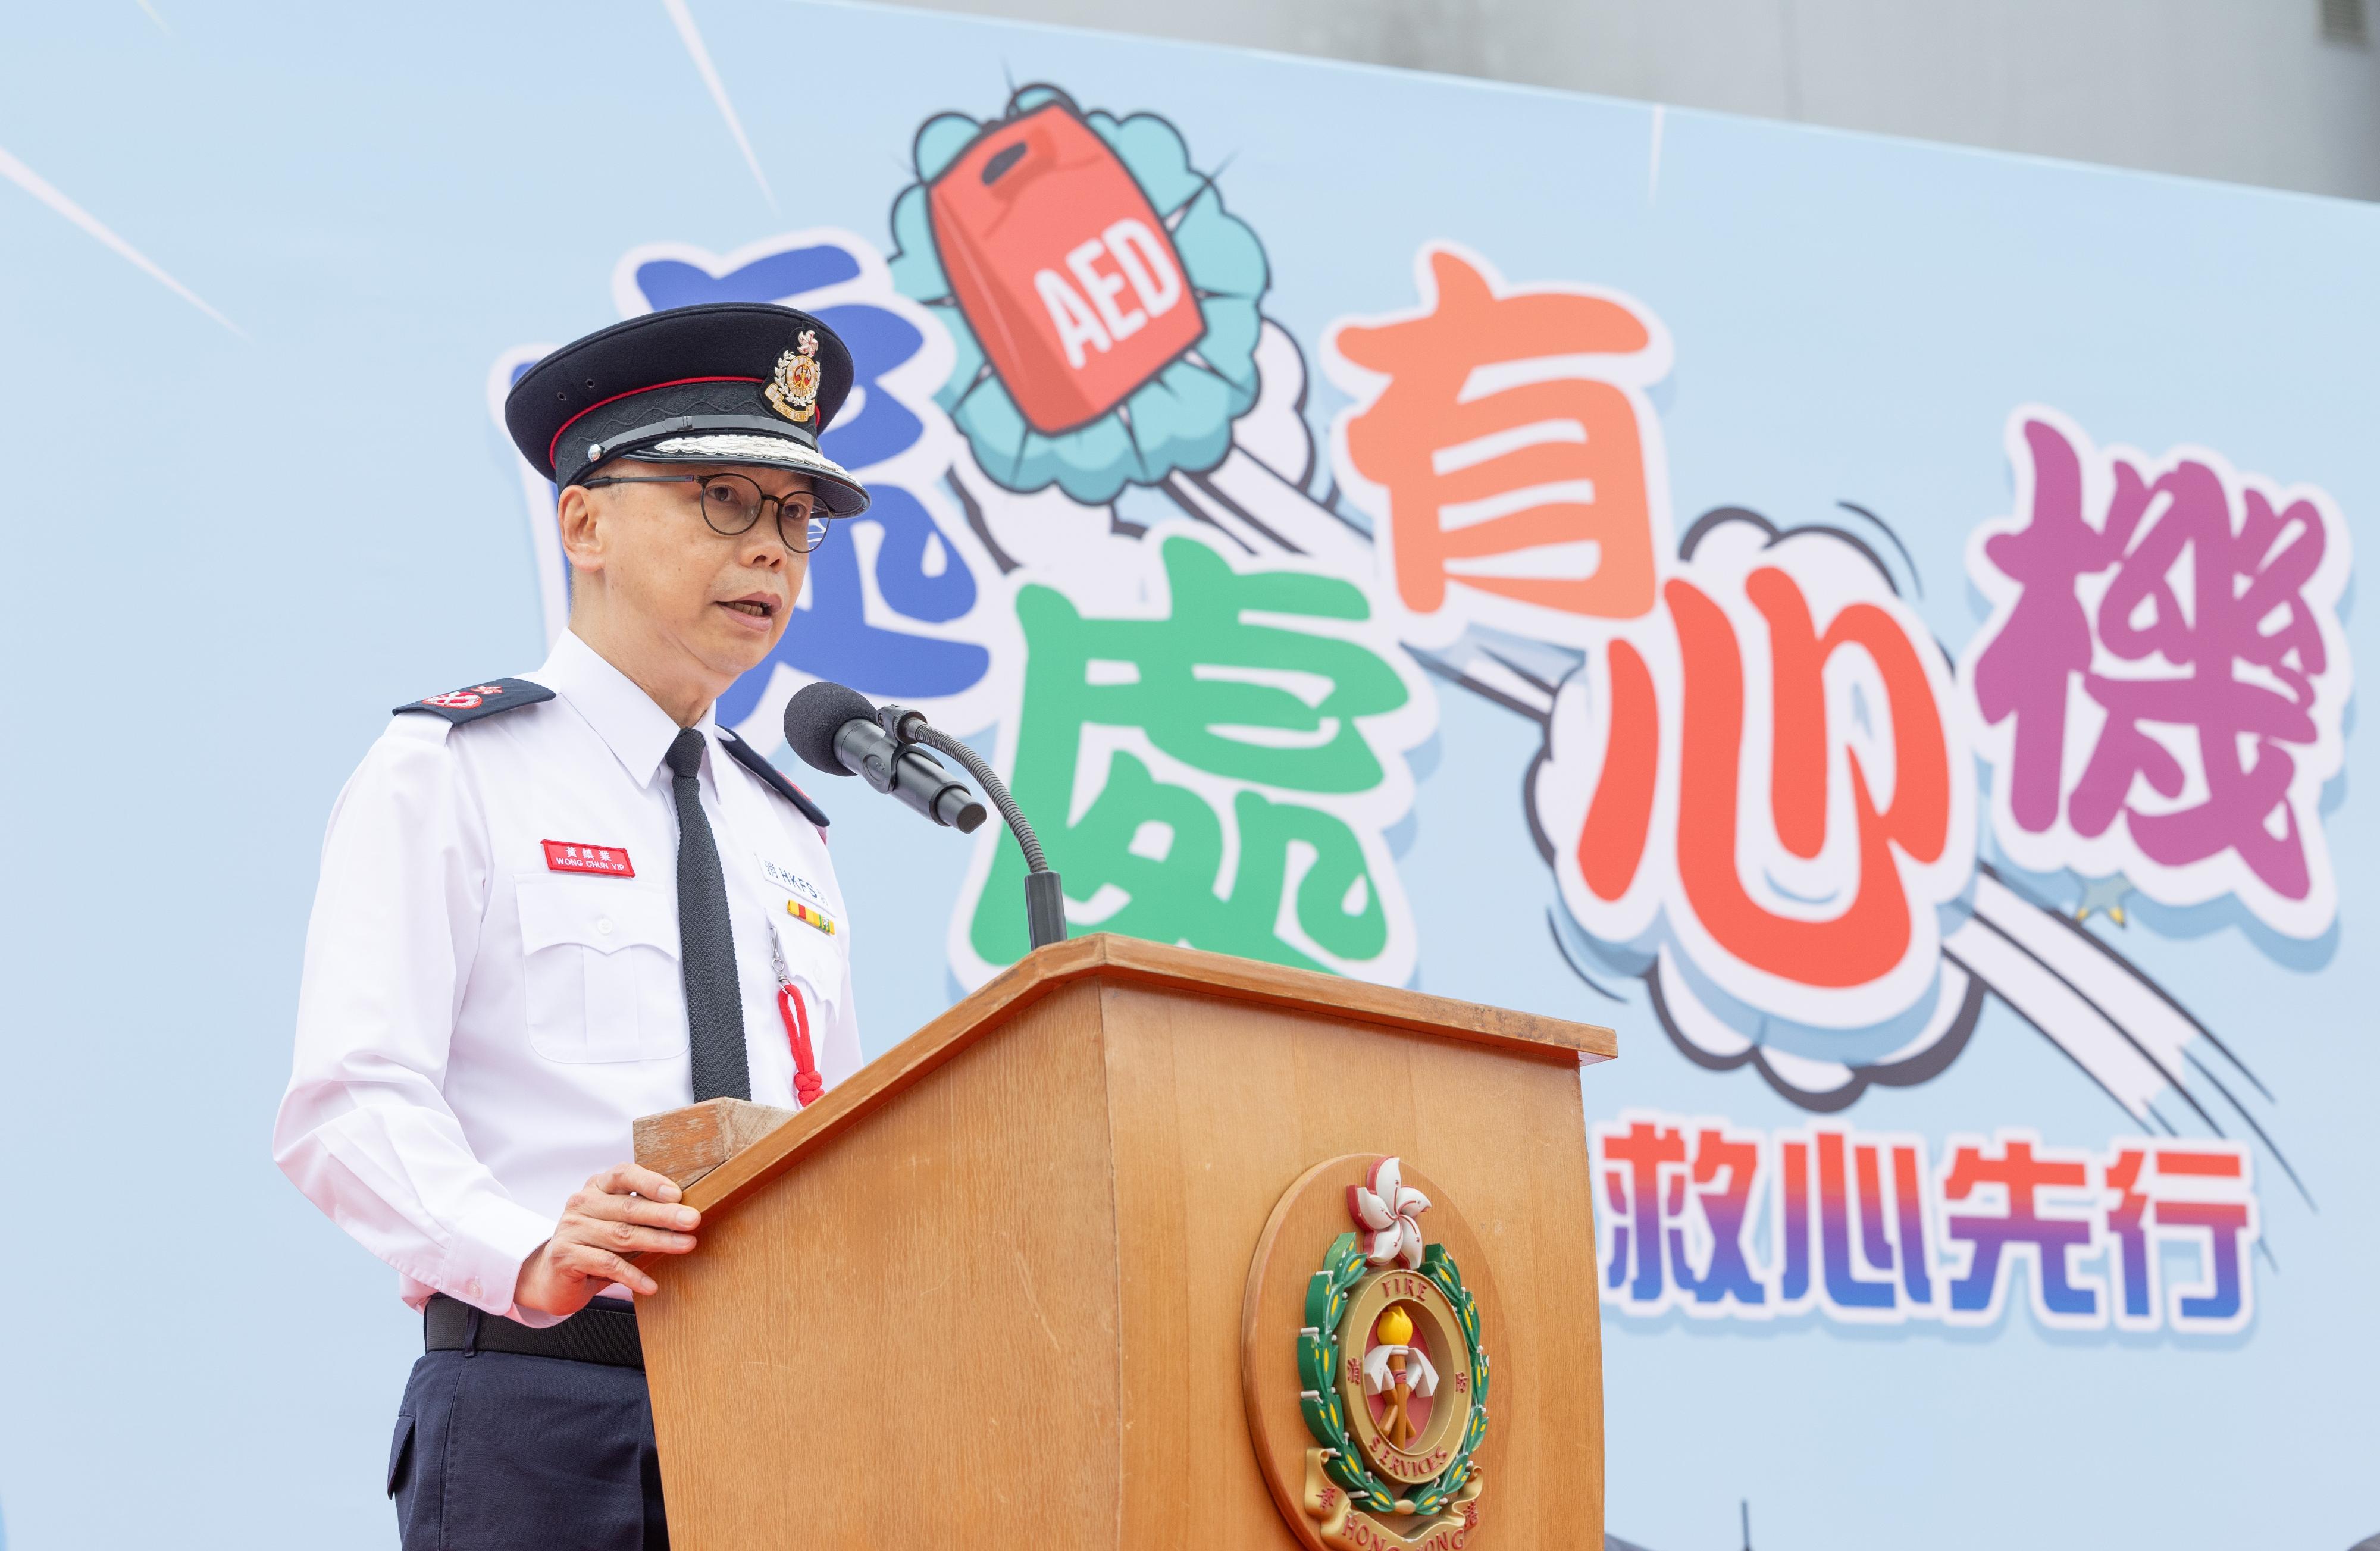 The Fire Services Department today (February 24) organised the AED Everywhere - Bus Companies United to Save Hearts event at the Fire and Ambulance Services Academy in Tseung Kwan O, appealing to all sectors of the community to install more automated external defibrillators. Photo shows the Deputy Director of Fire Services (Operations), Mr Angus Wong, delivering a speech at the launching ceremony.